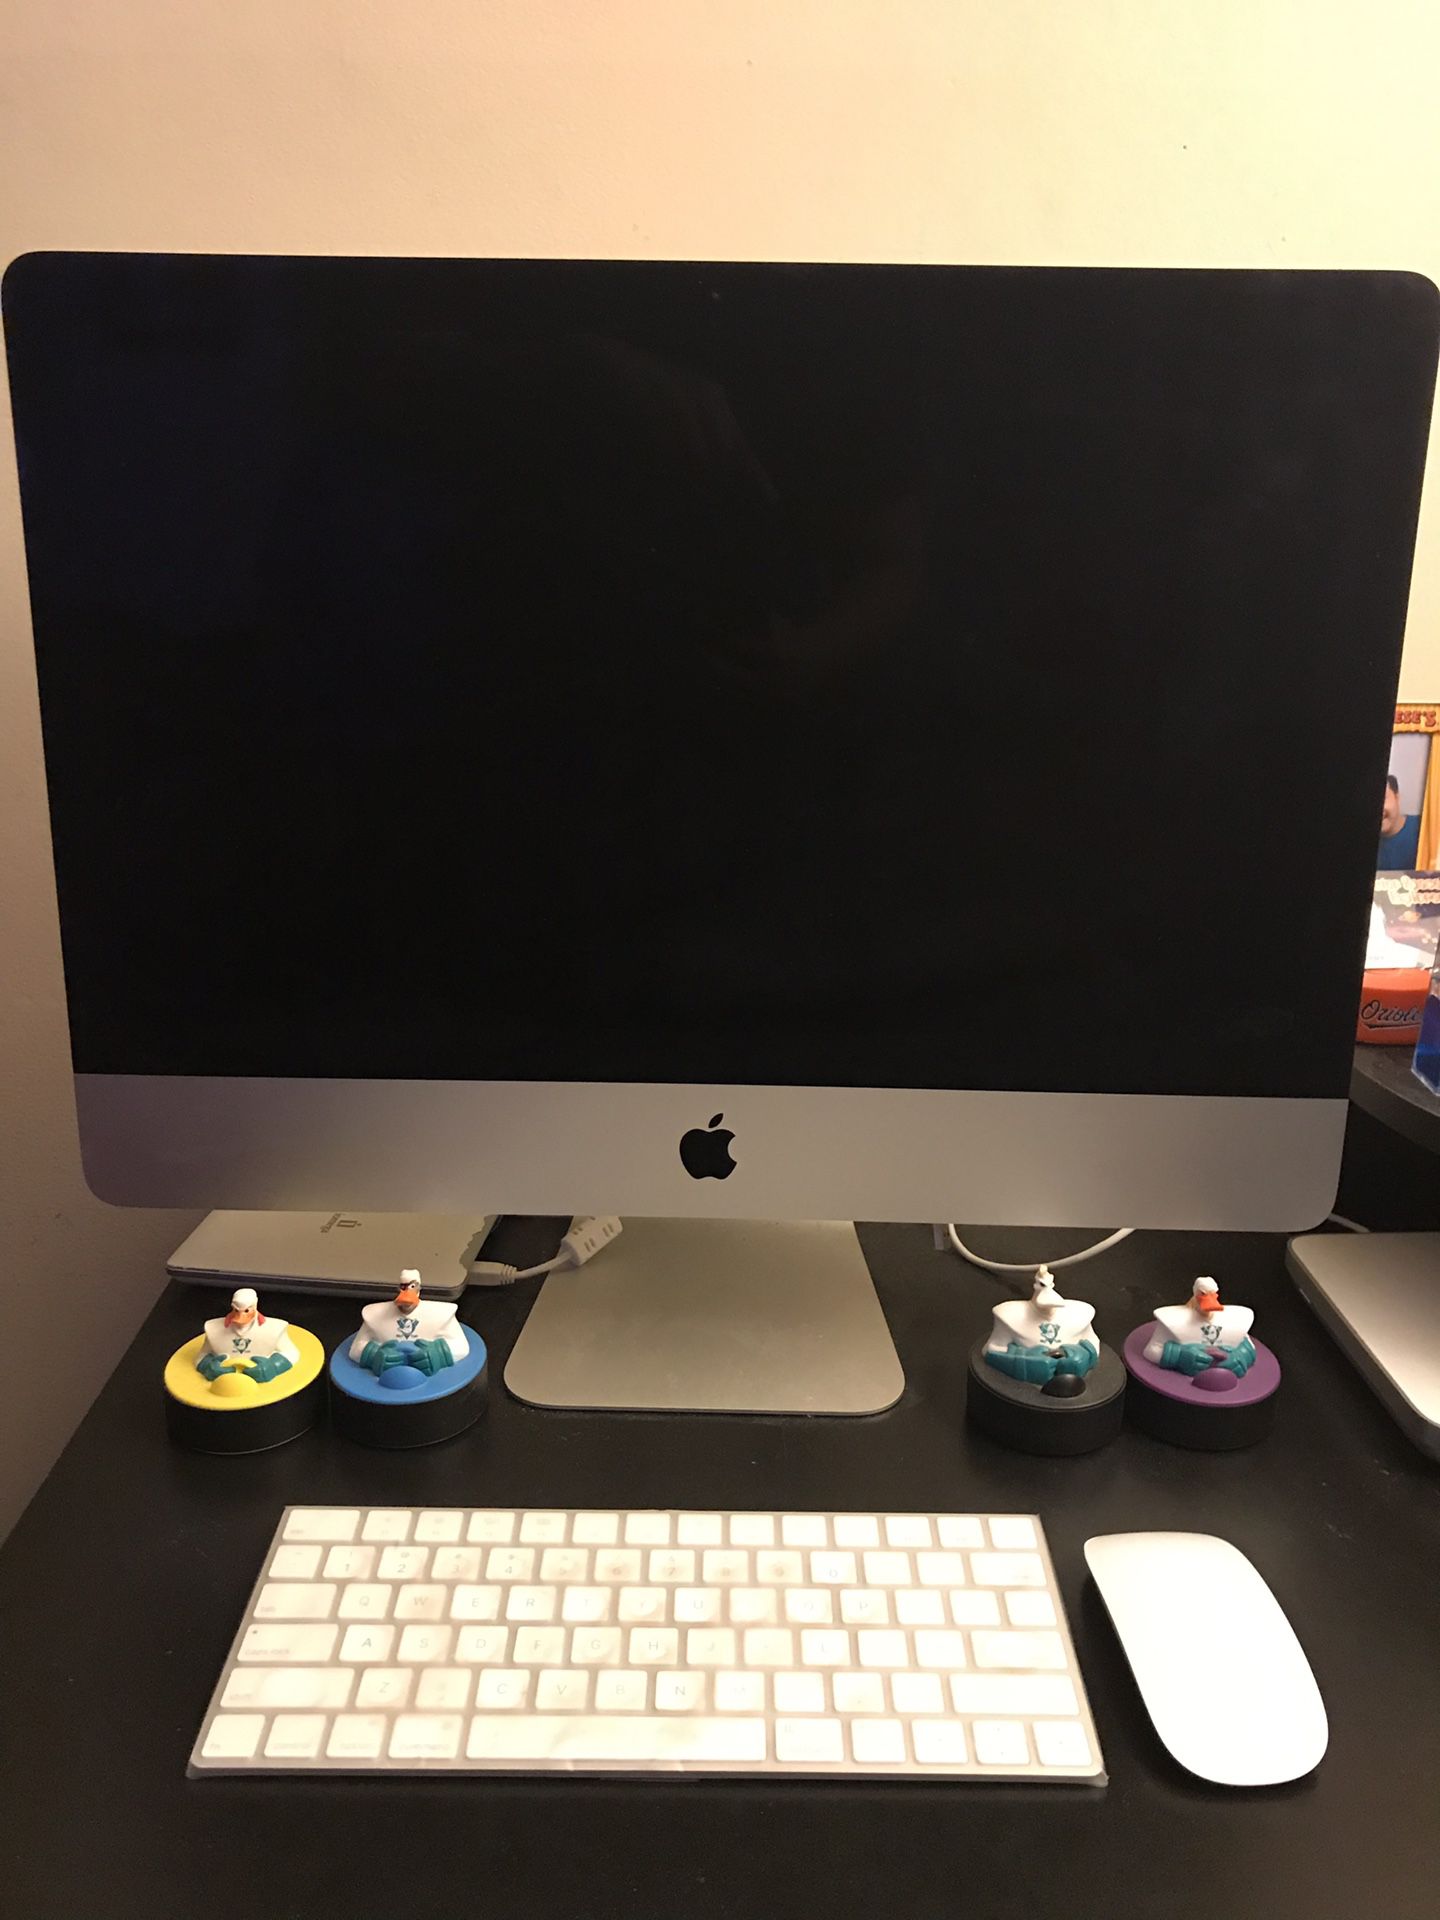 21” imac late 2015 almost new